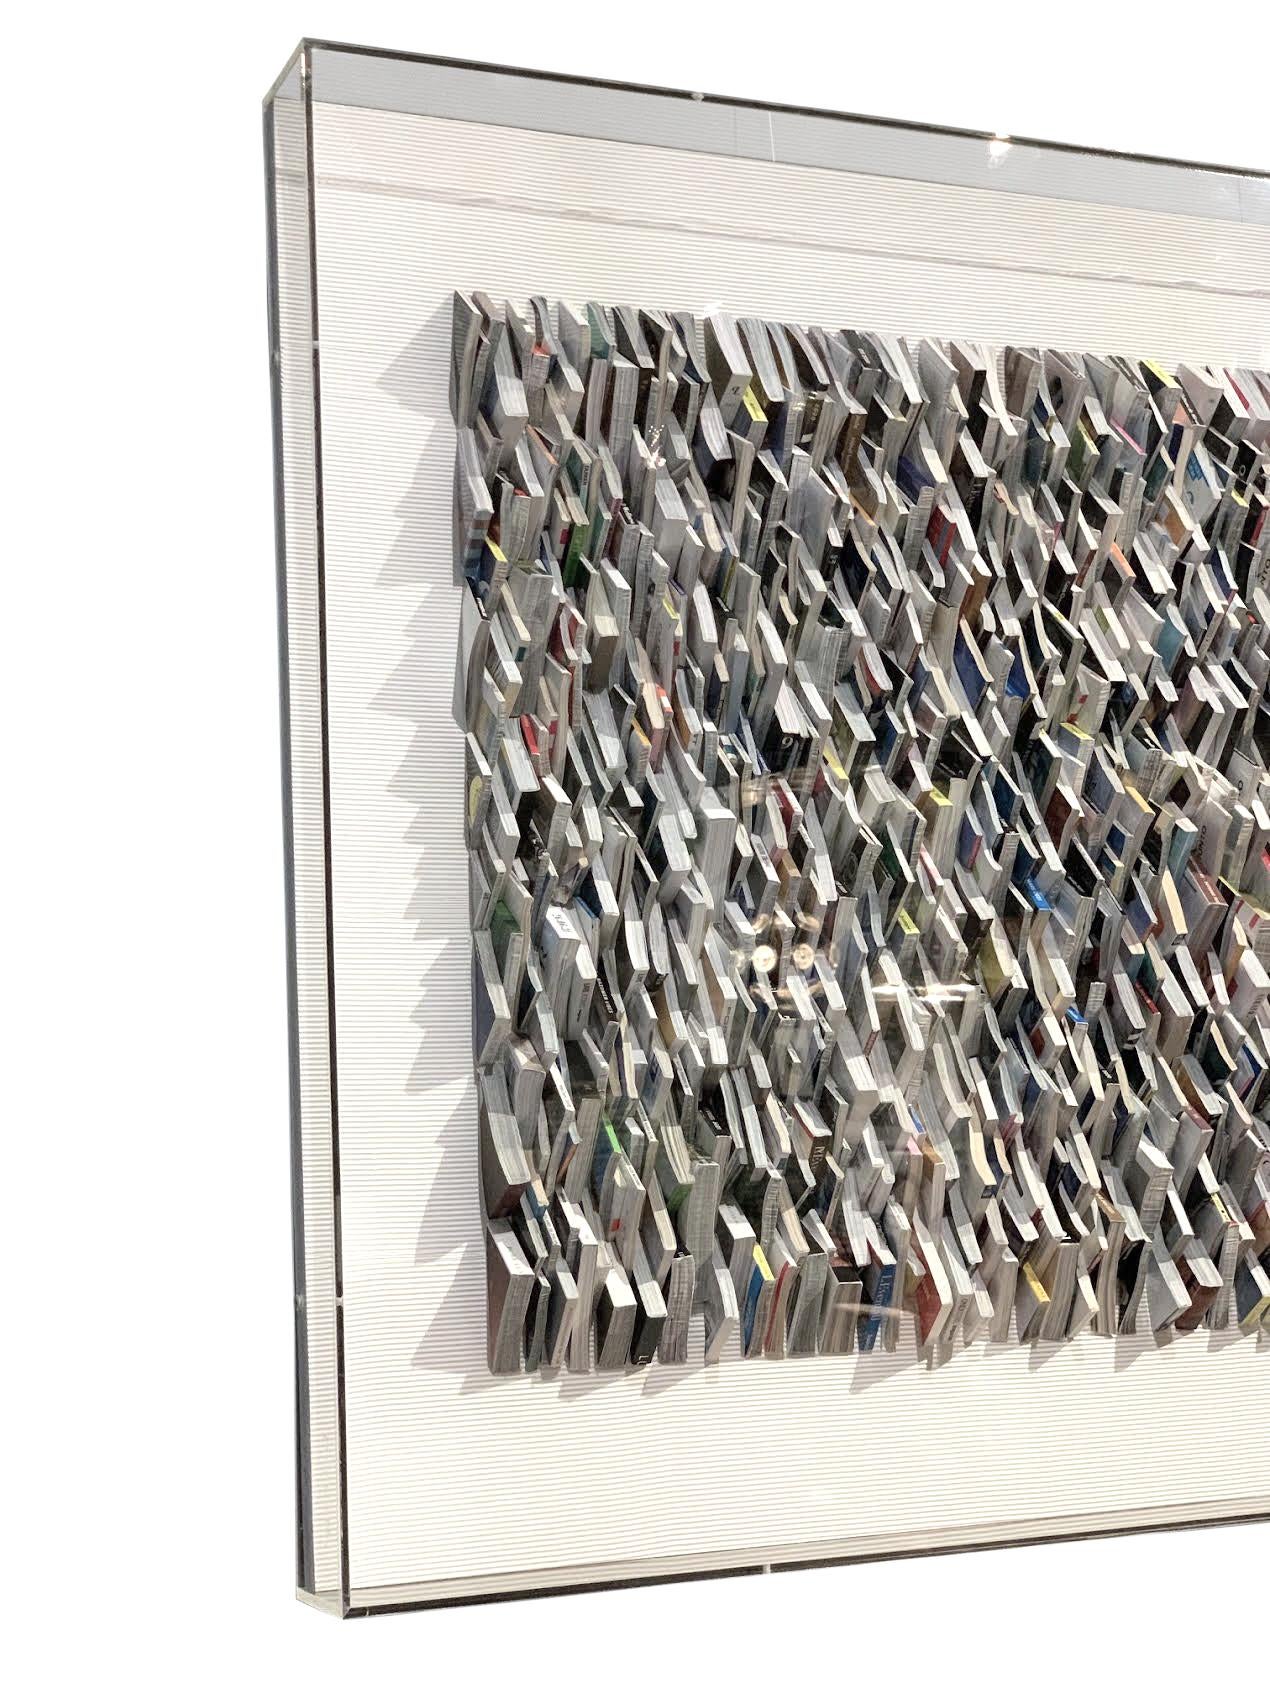 Contemporary artist Guy Leclef from his collection of Paper Works.
Cut pieces of hand folded colored pages from various international magazines folded and placed to create a unique and dramatic wall sculpture
All triangular shaped.
Folded paper